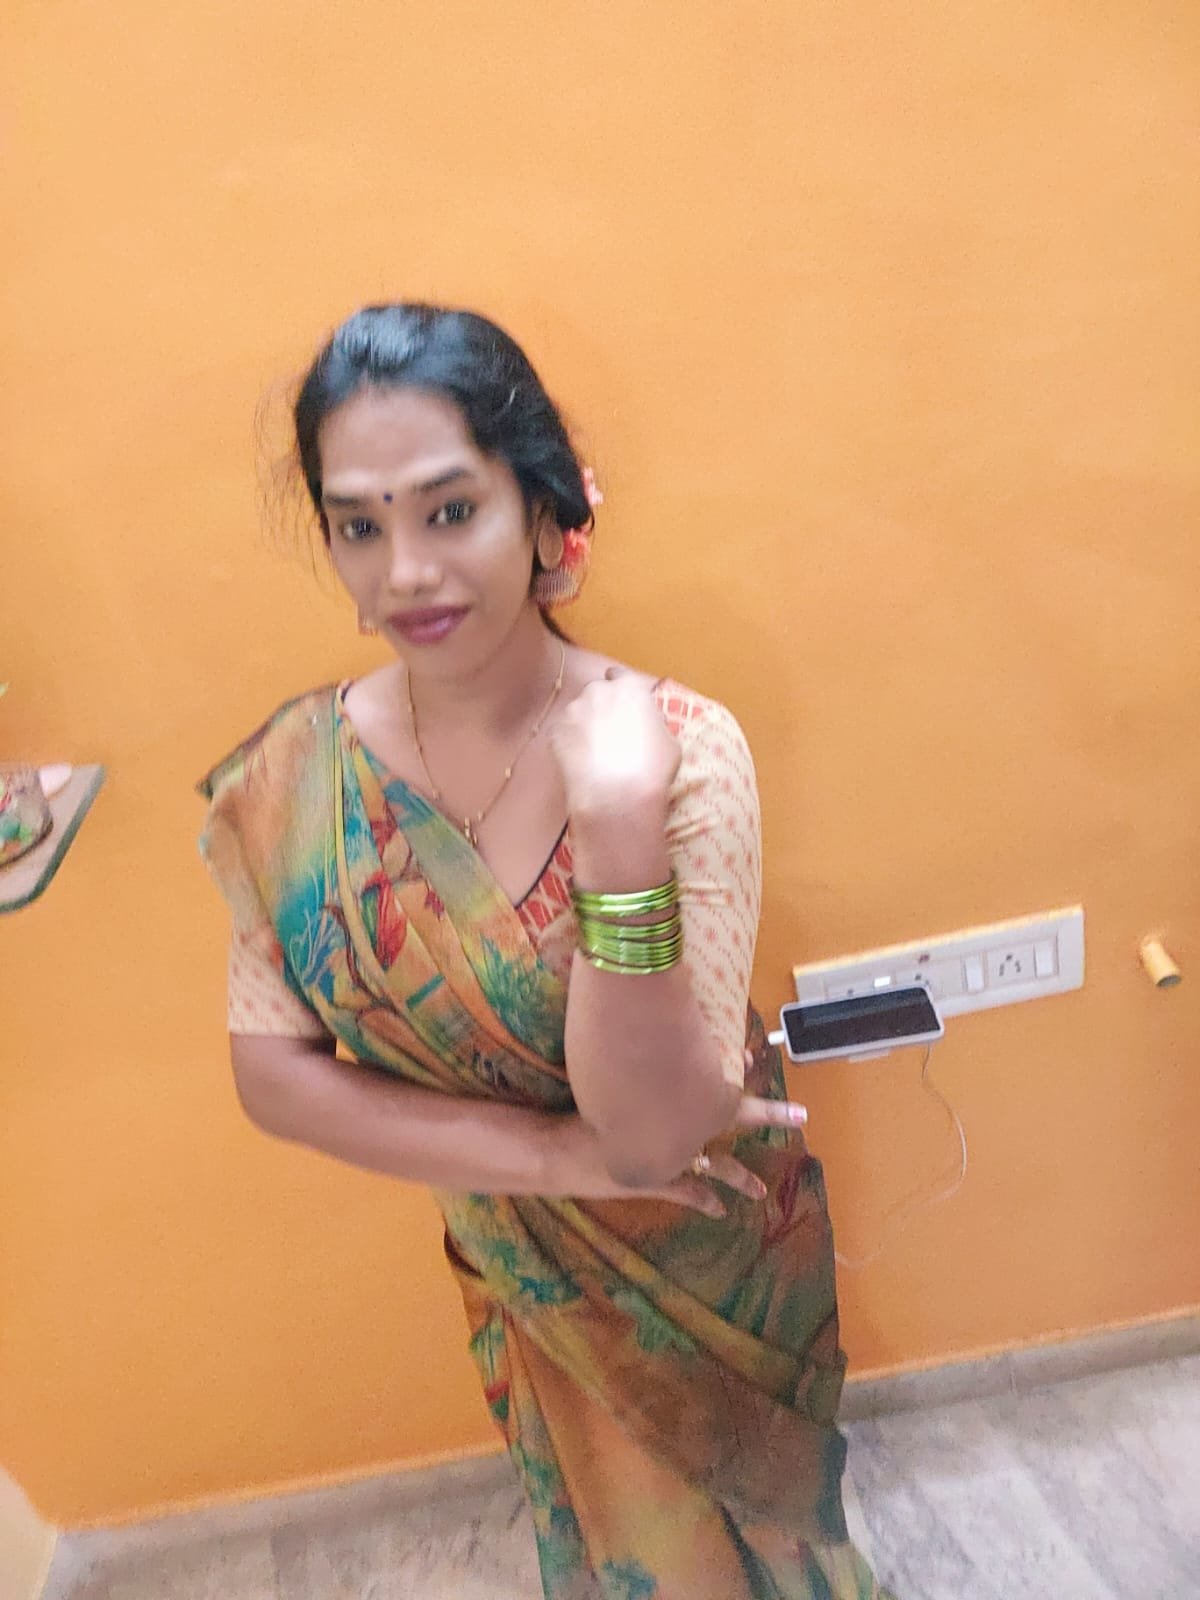 Chennai Tranny - Meghna, Indian Transsexual adult performer in Chennai